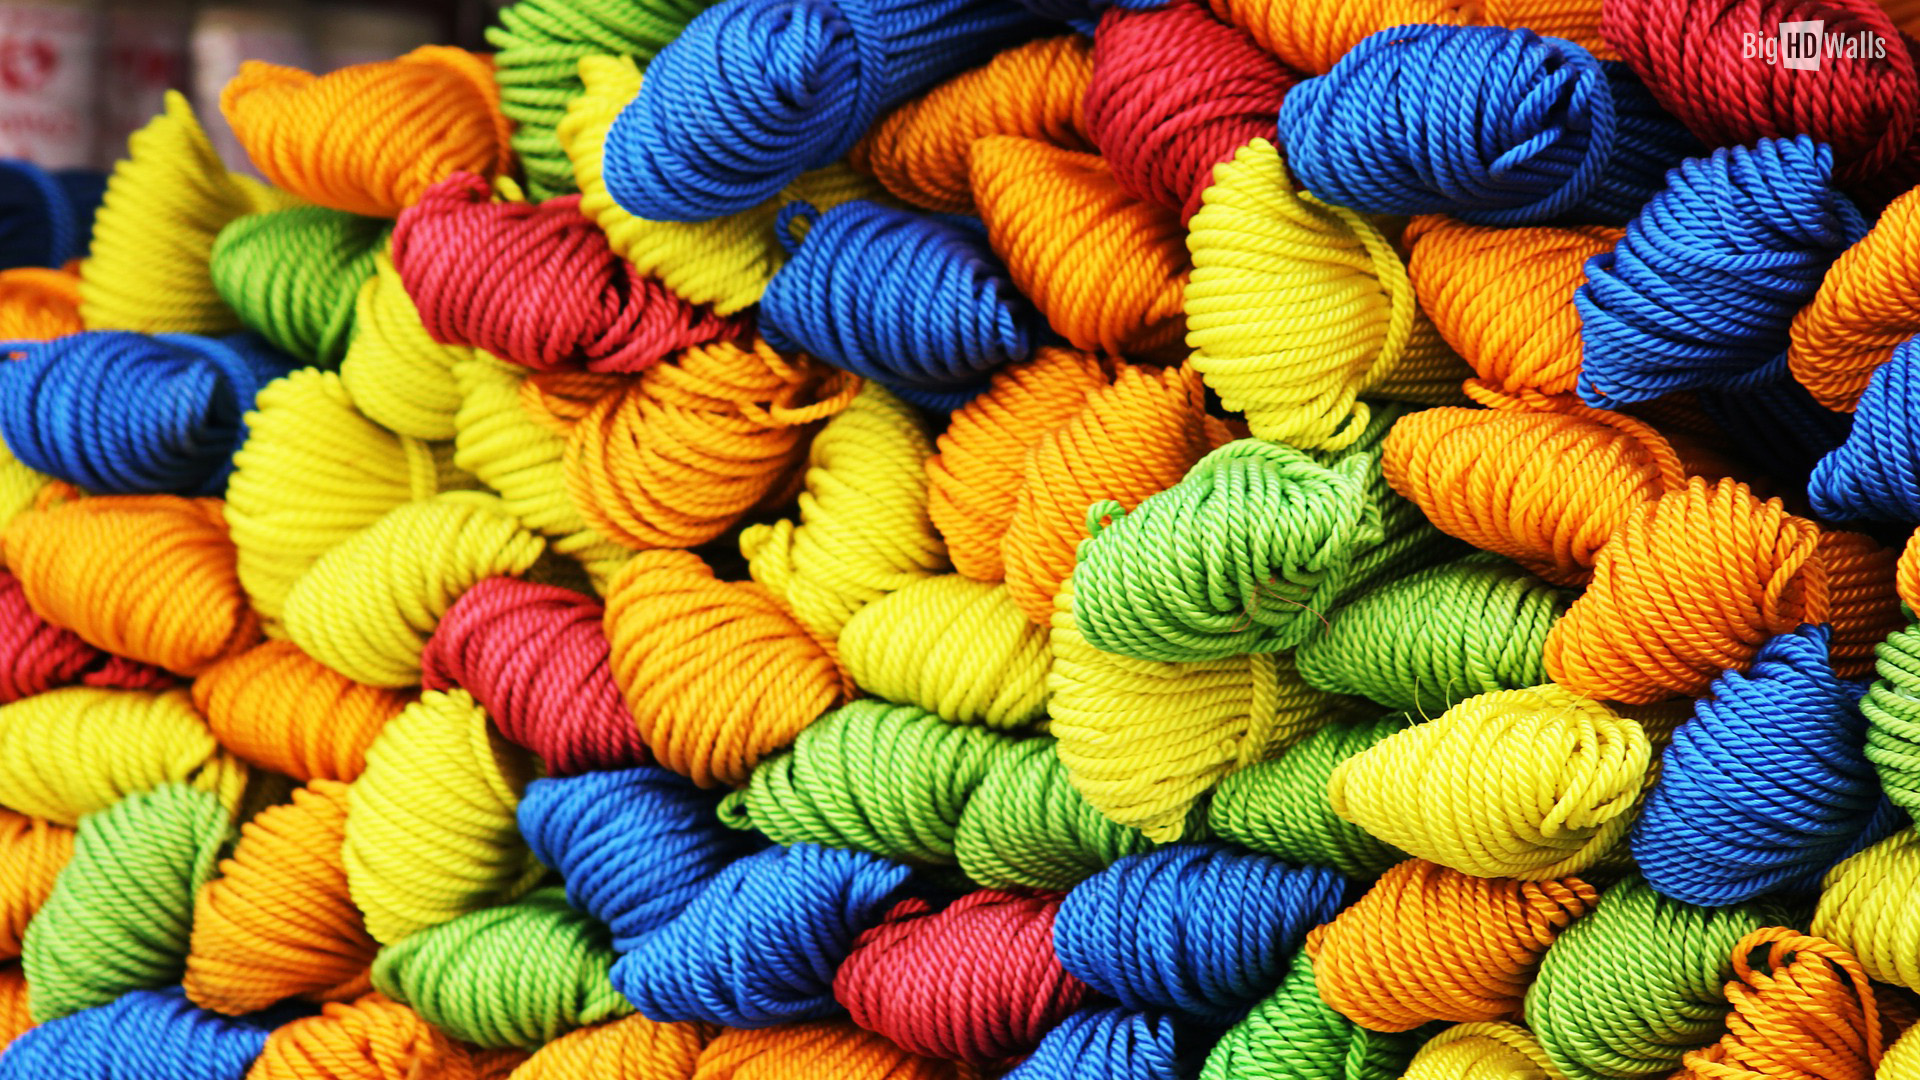 Colorful Yarn Pieces Jigsaw Puzzle